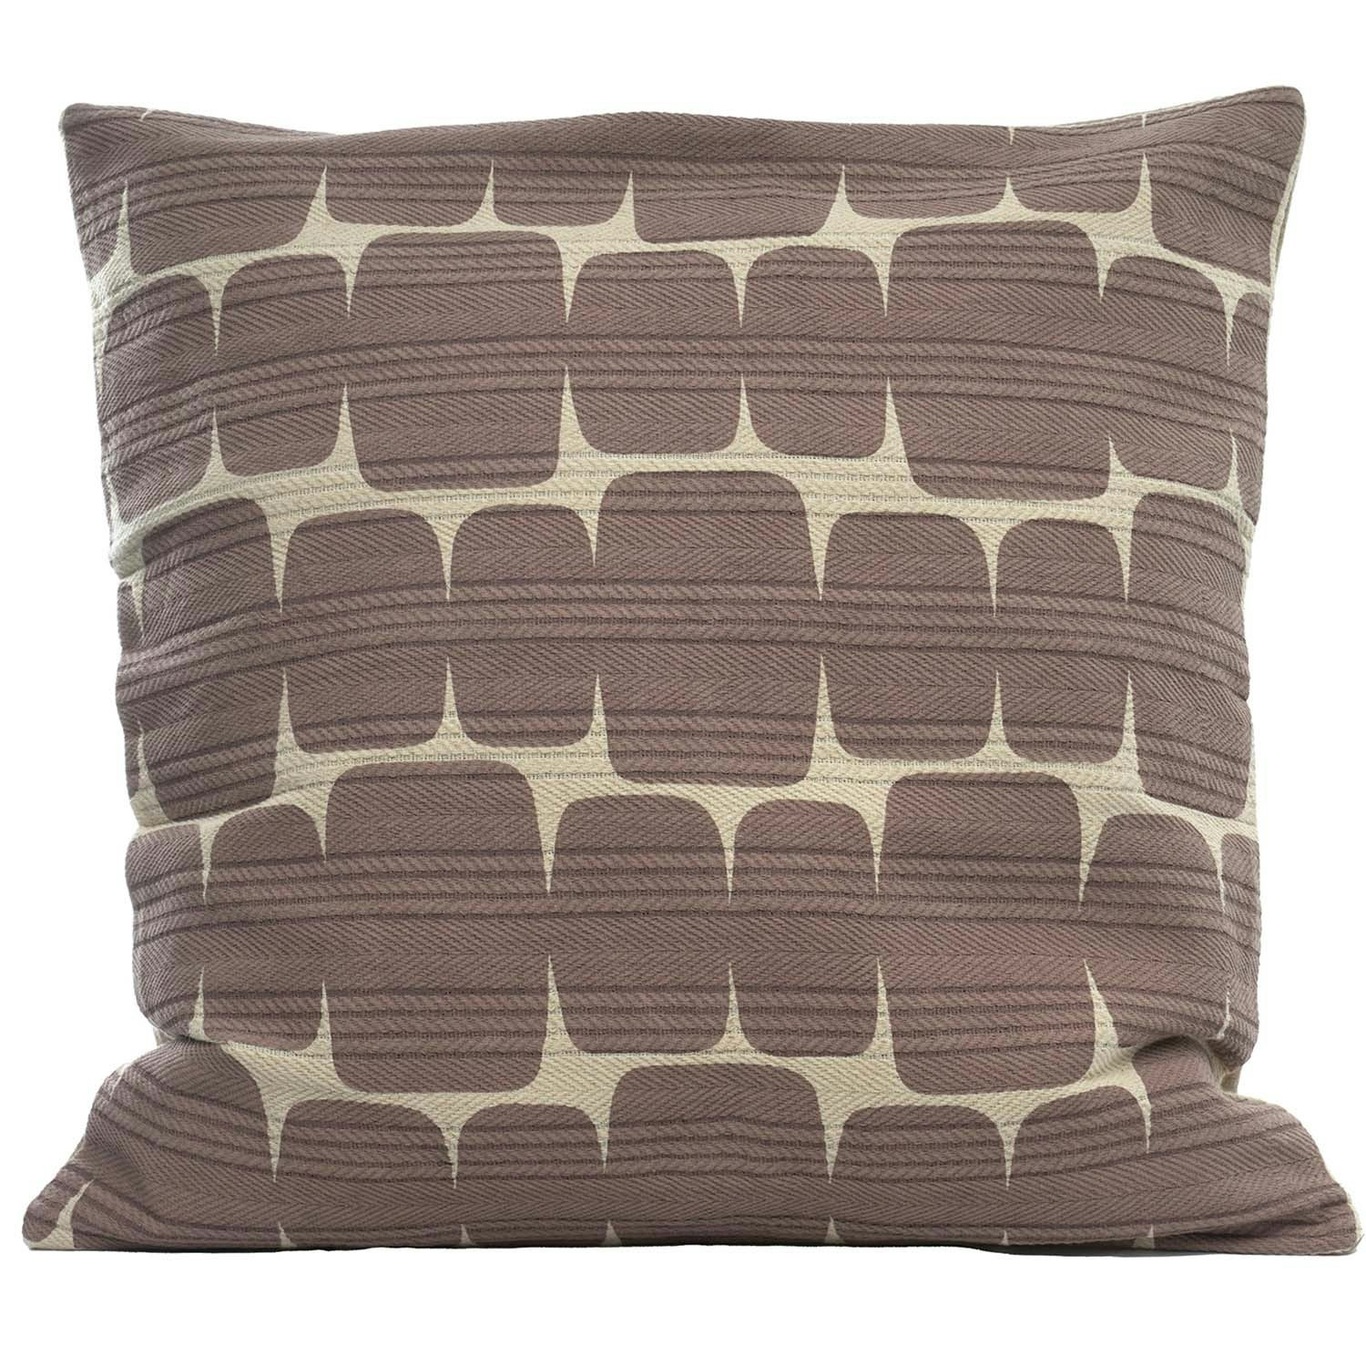 Printed Stone Cushion Cover 50x50 cm, Dusty Pink